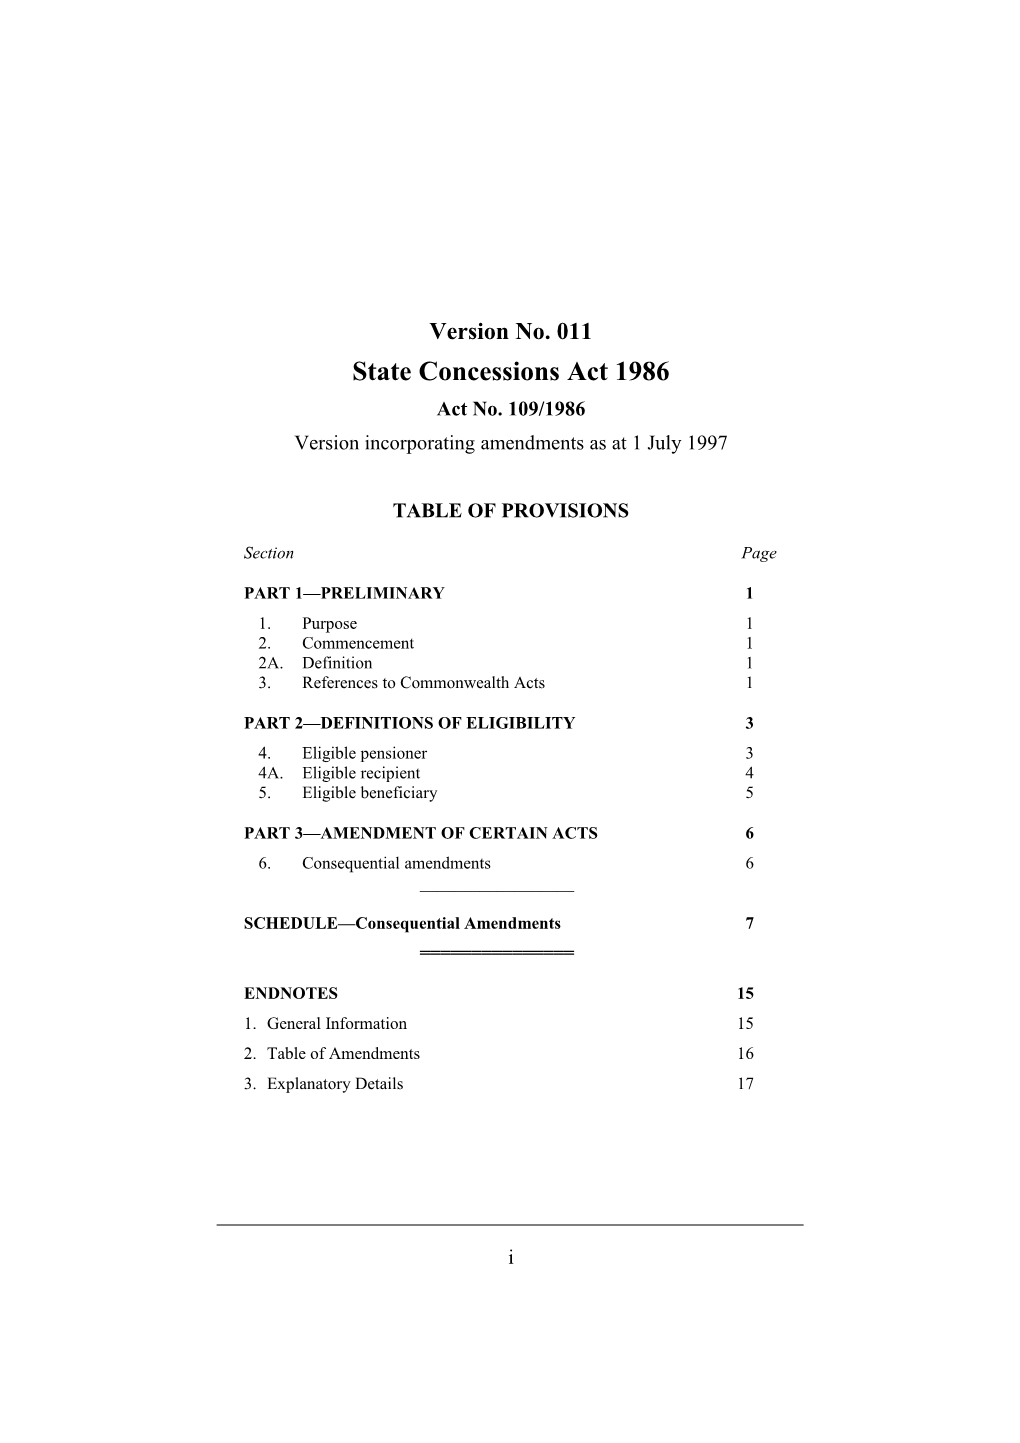 State Concessions Act 1986